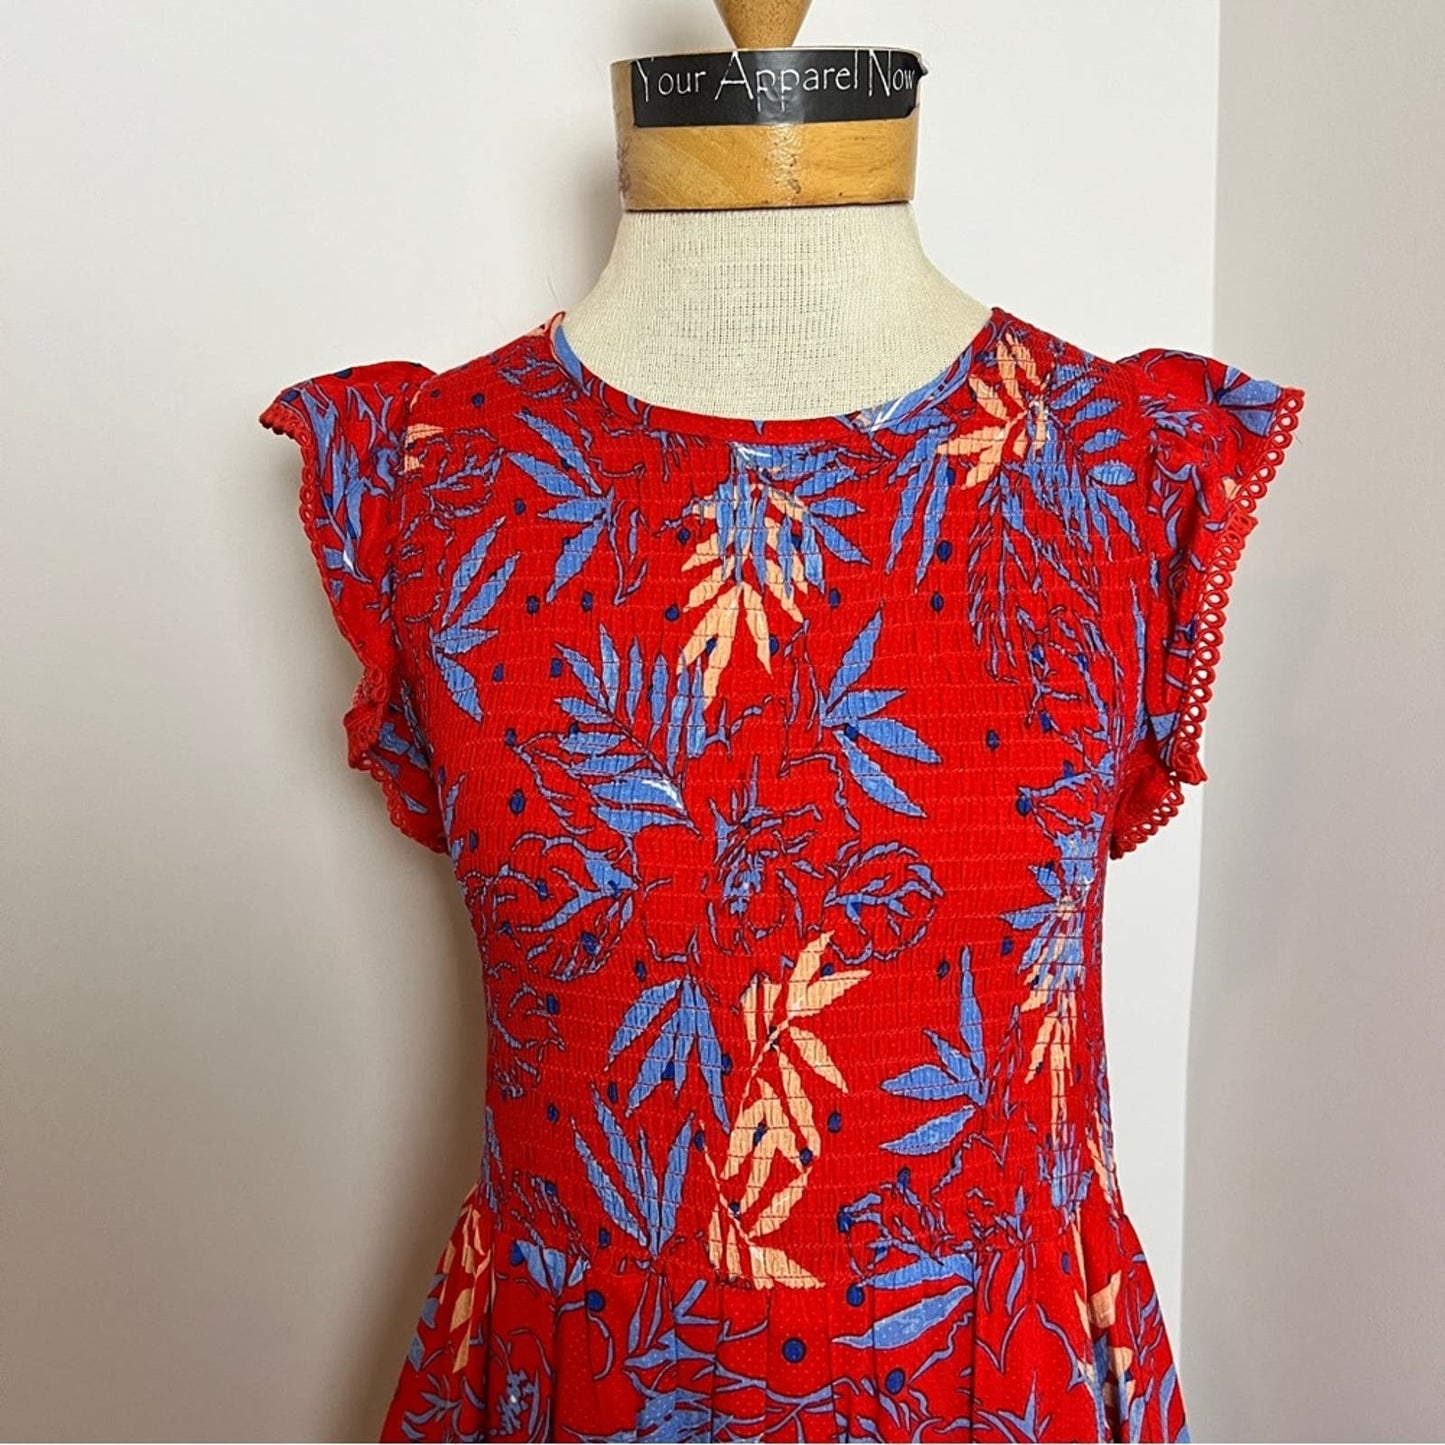 Anthropologie Lost + Wander Red Floral Leaves Short Sleeve Midi Dress size Small